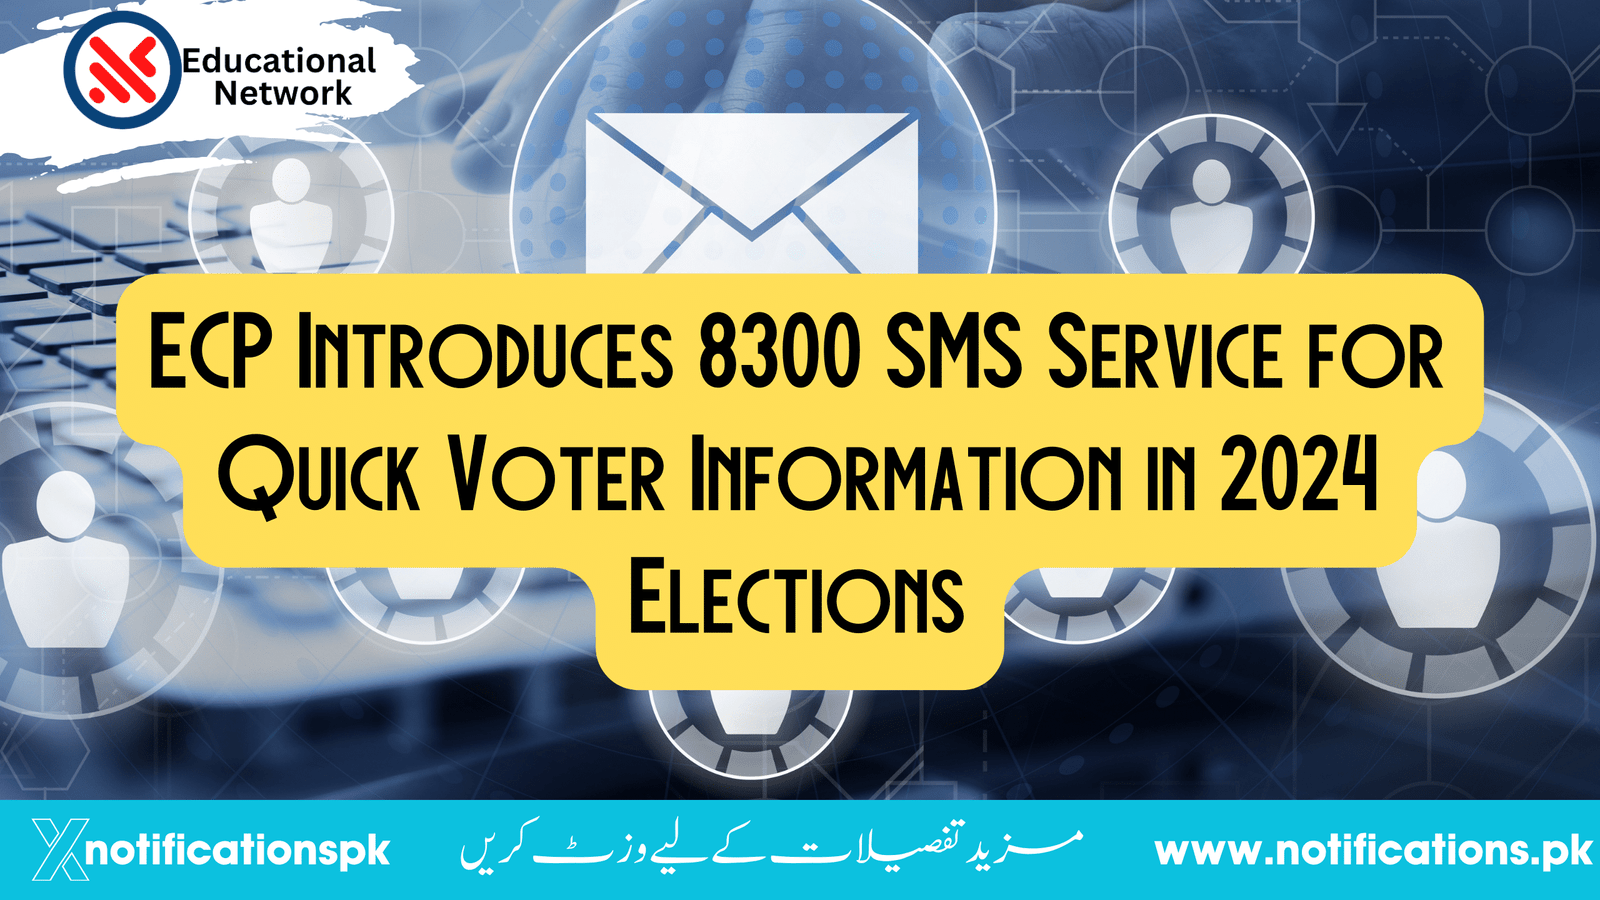 ECP Introduces 8300 SMS Service for Quick Voter Information in 2024 Elections